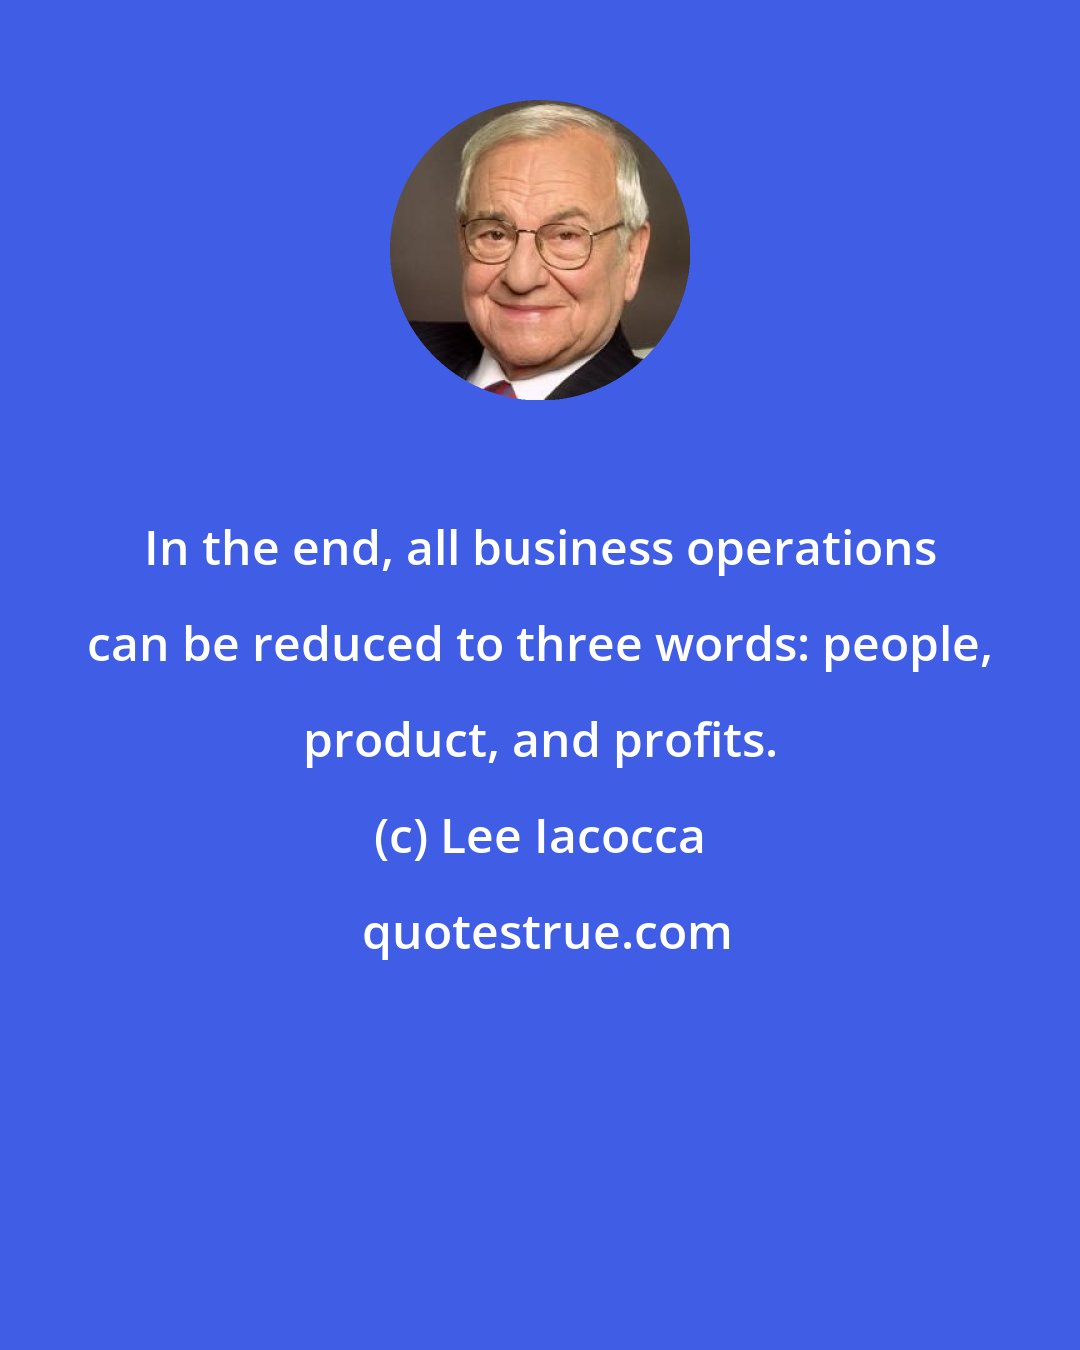 Lee Iacocca: In the end, all business operations can be reduced to three words: people, product, and profits.